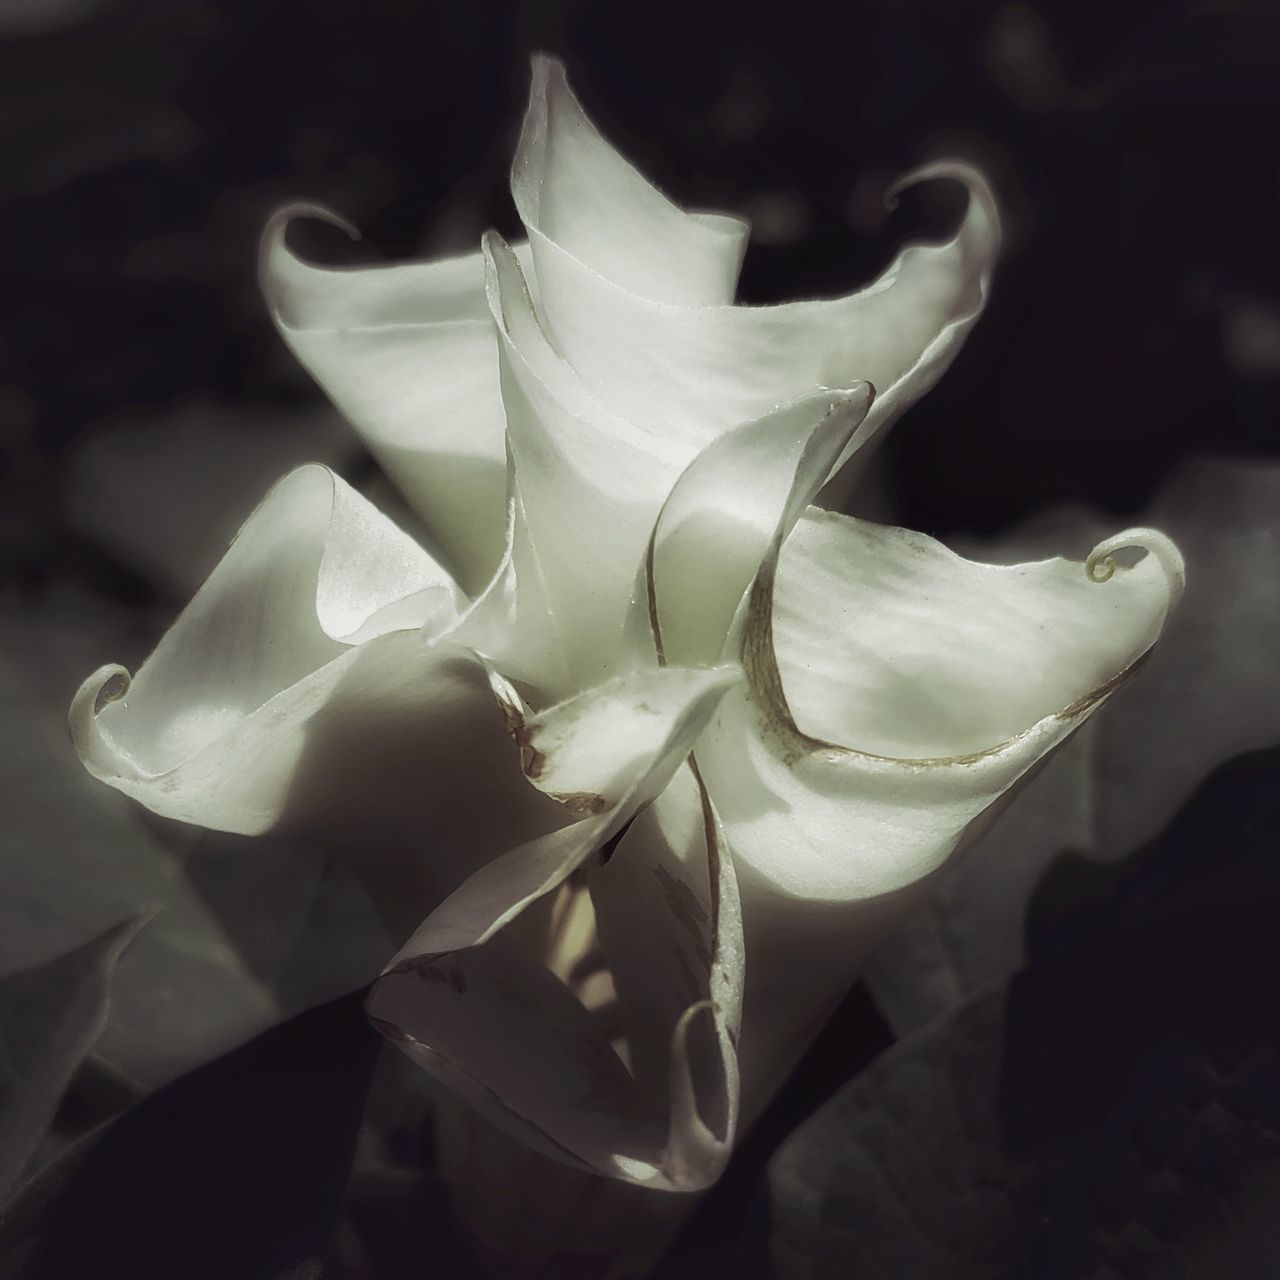 CLOSE-UP OF WHITE ROSE PLANT